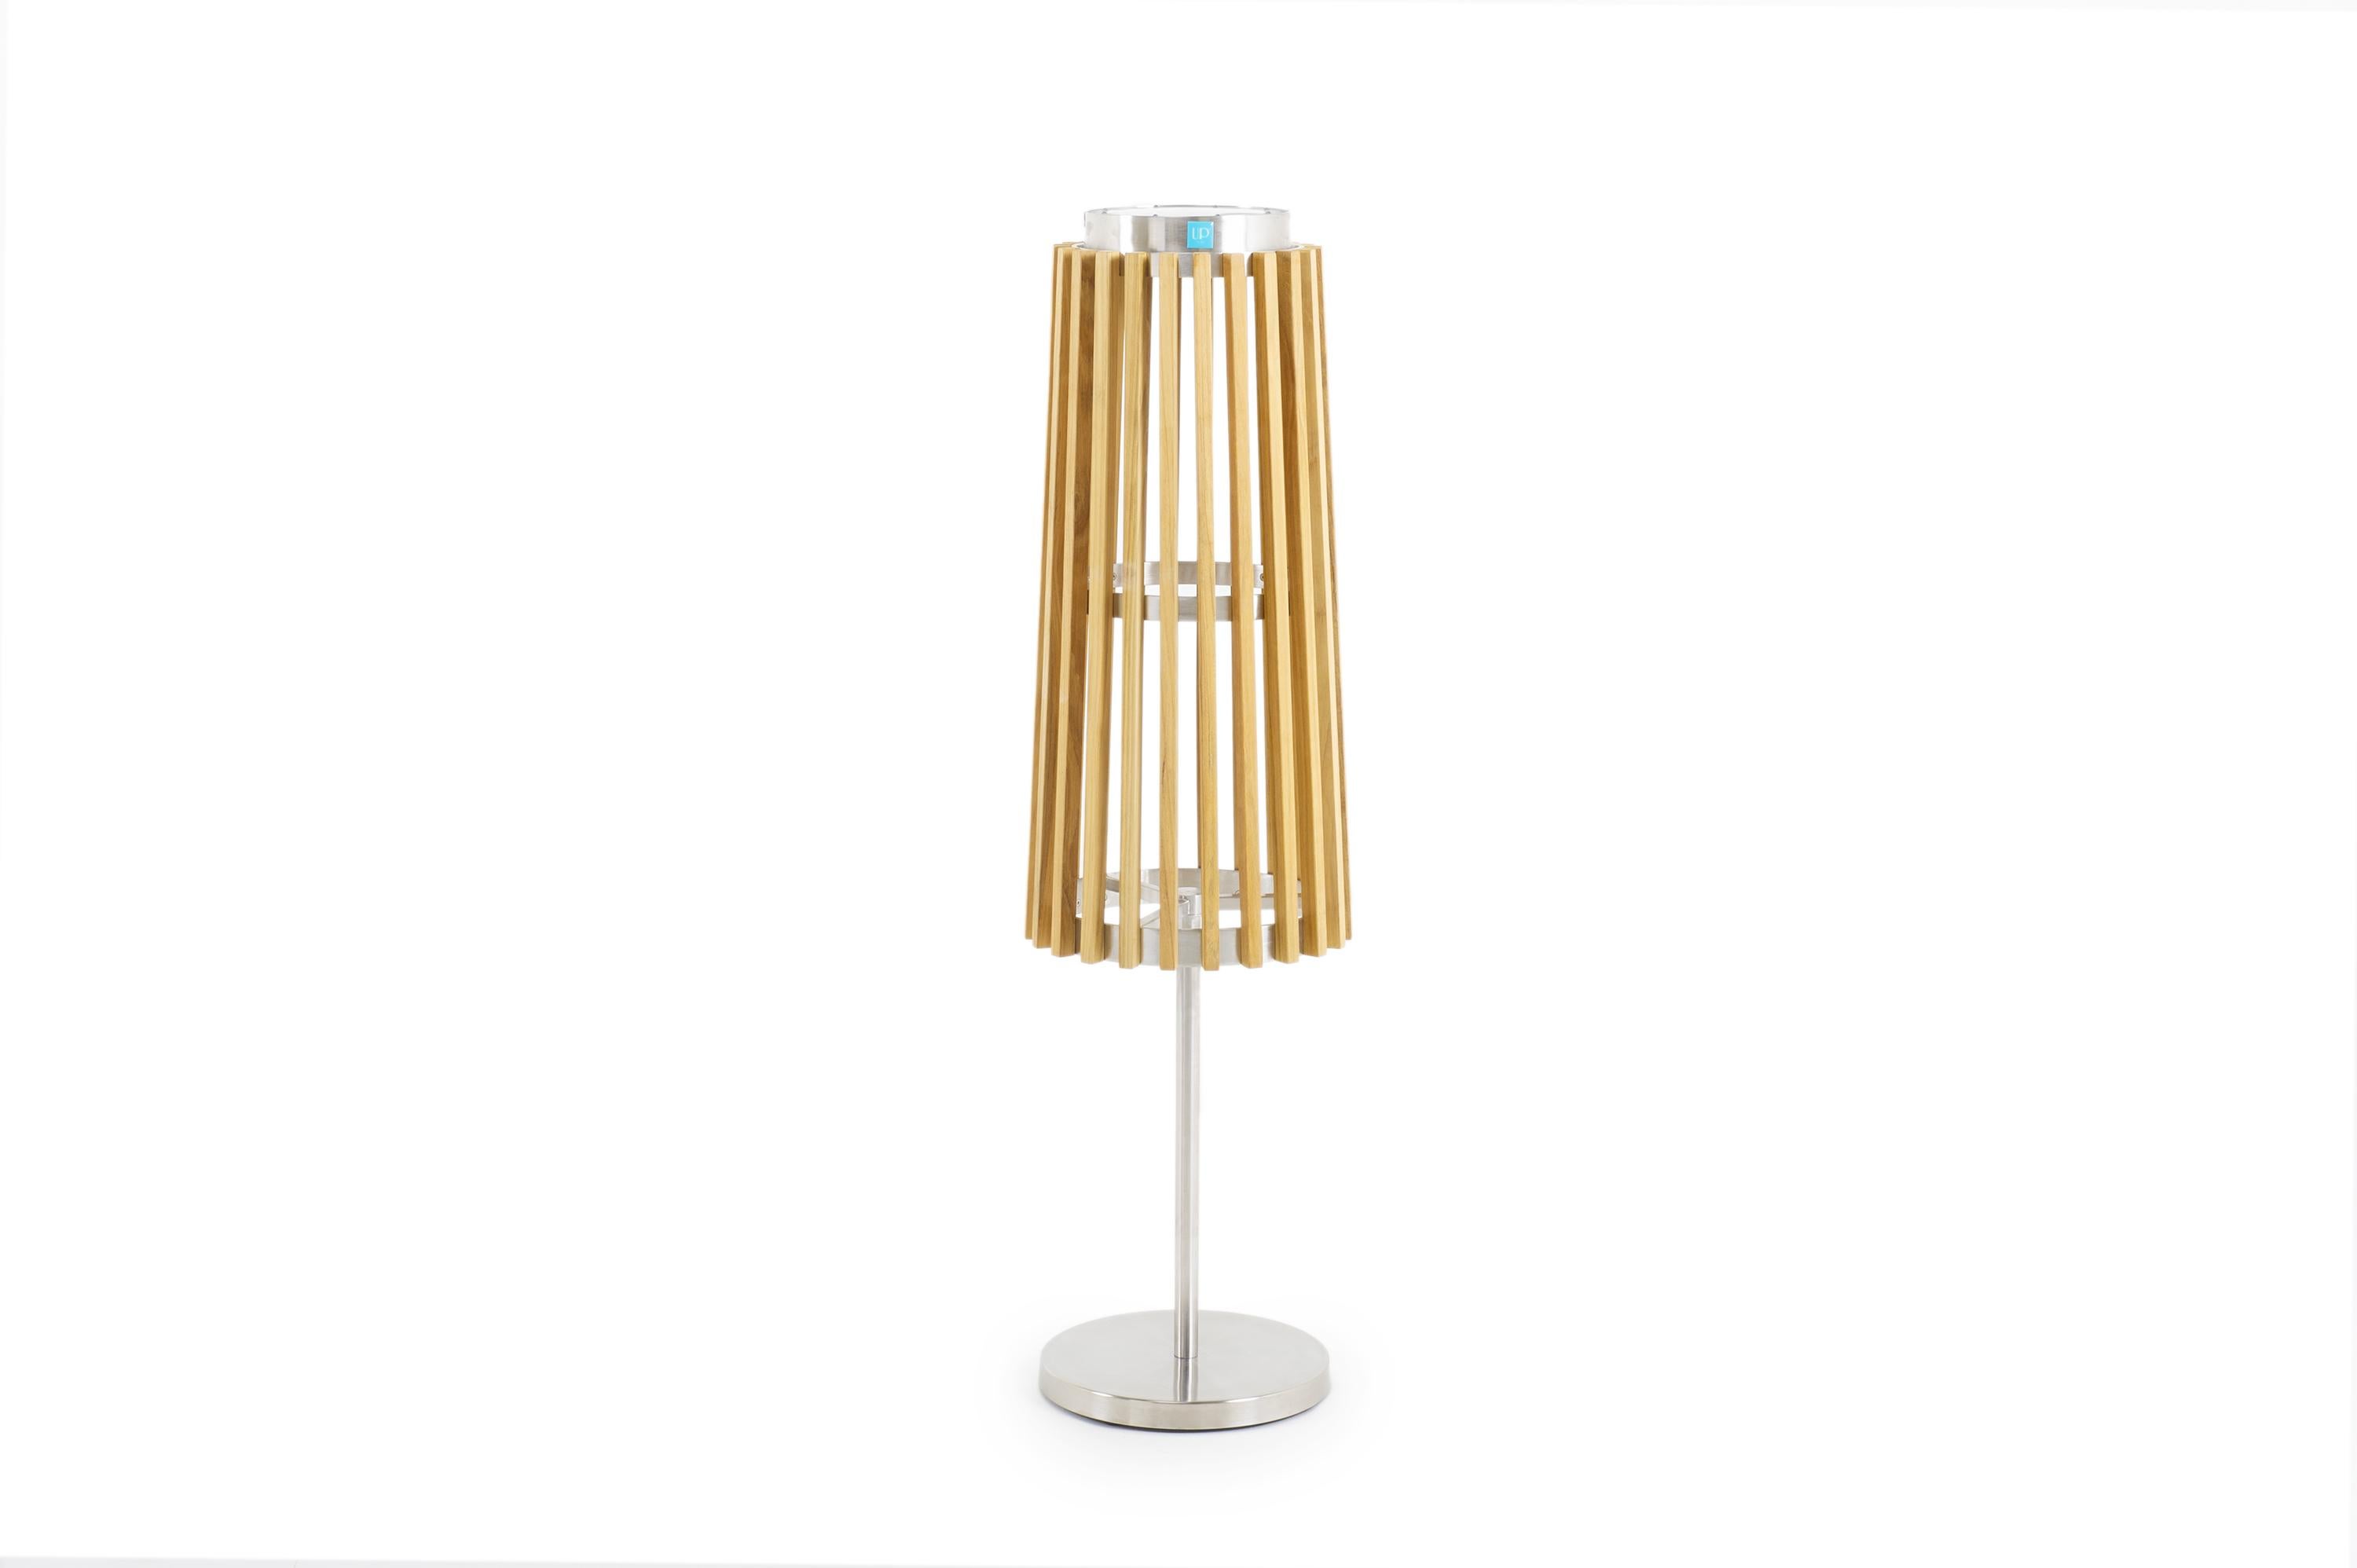 Unopiu' Solare Lighting Outdoor Collection For Sale 1